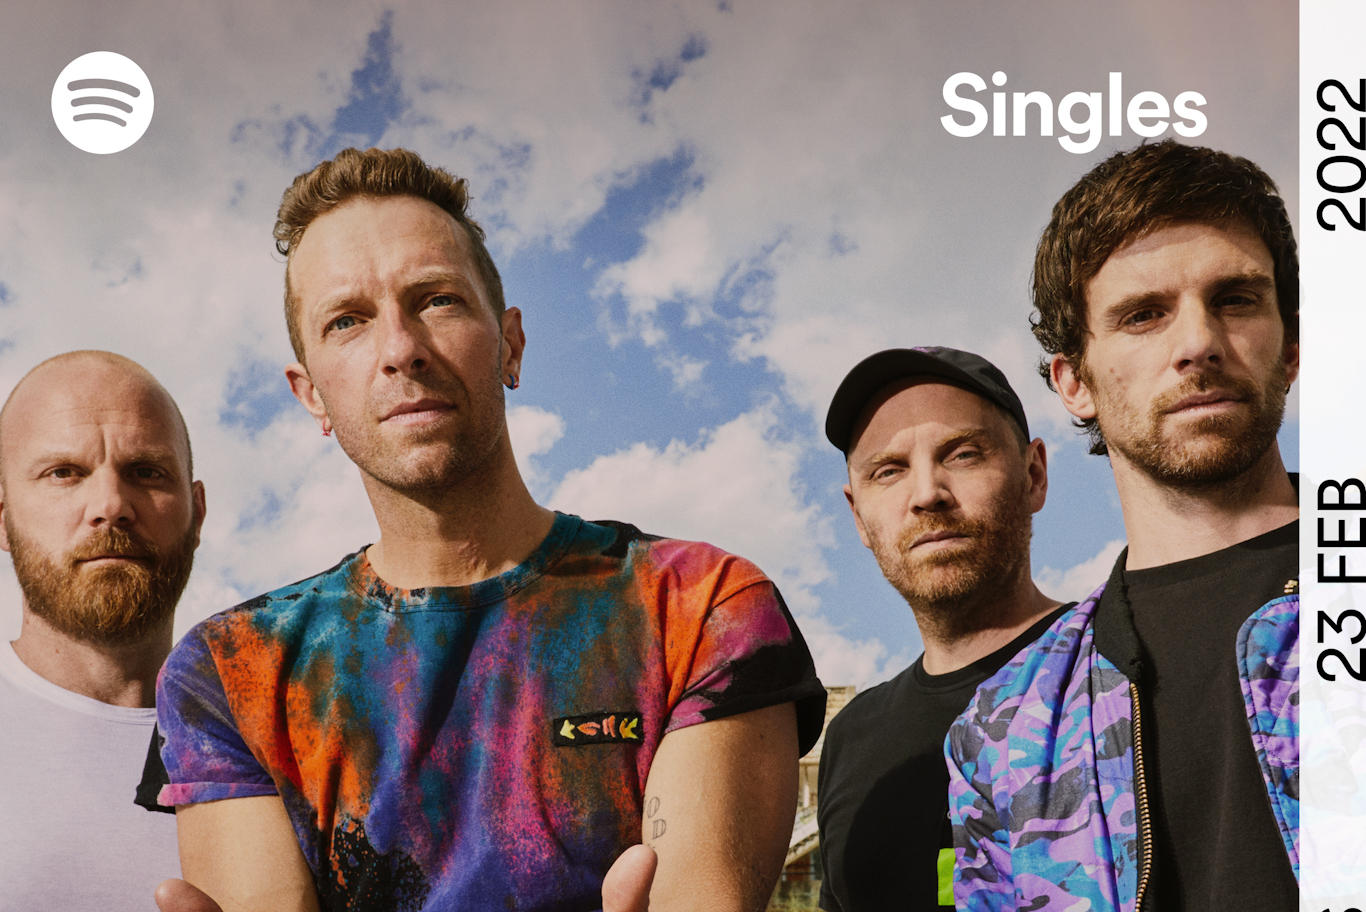 COLDPLAY have released their first Spotify Singles recording today 